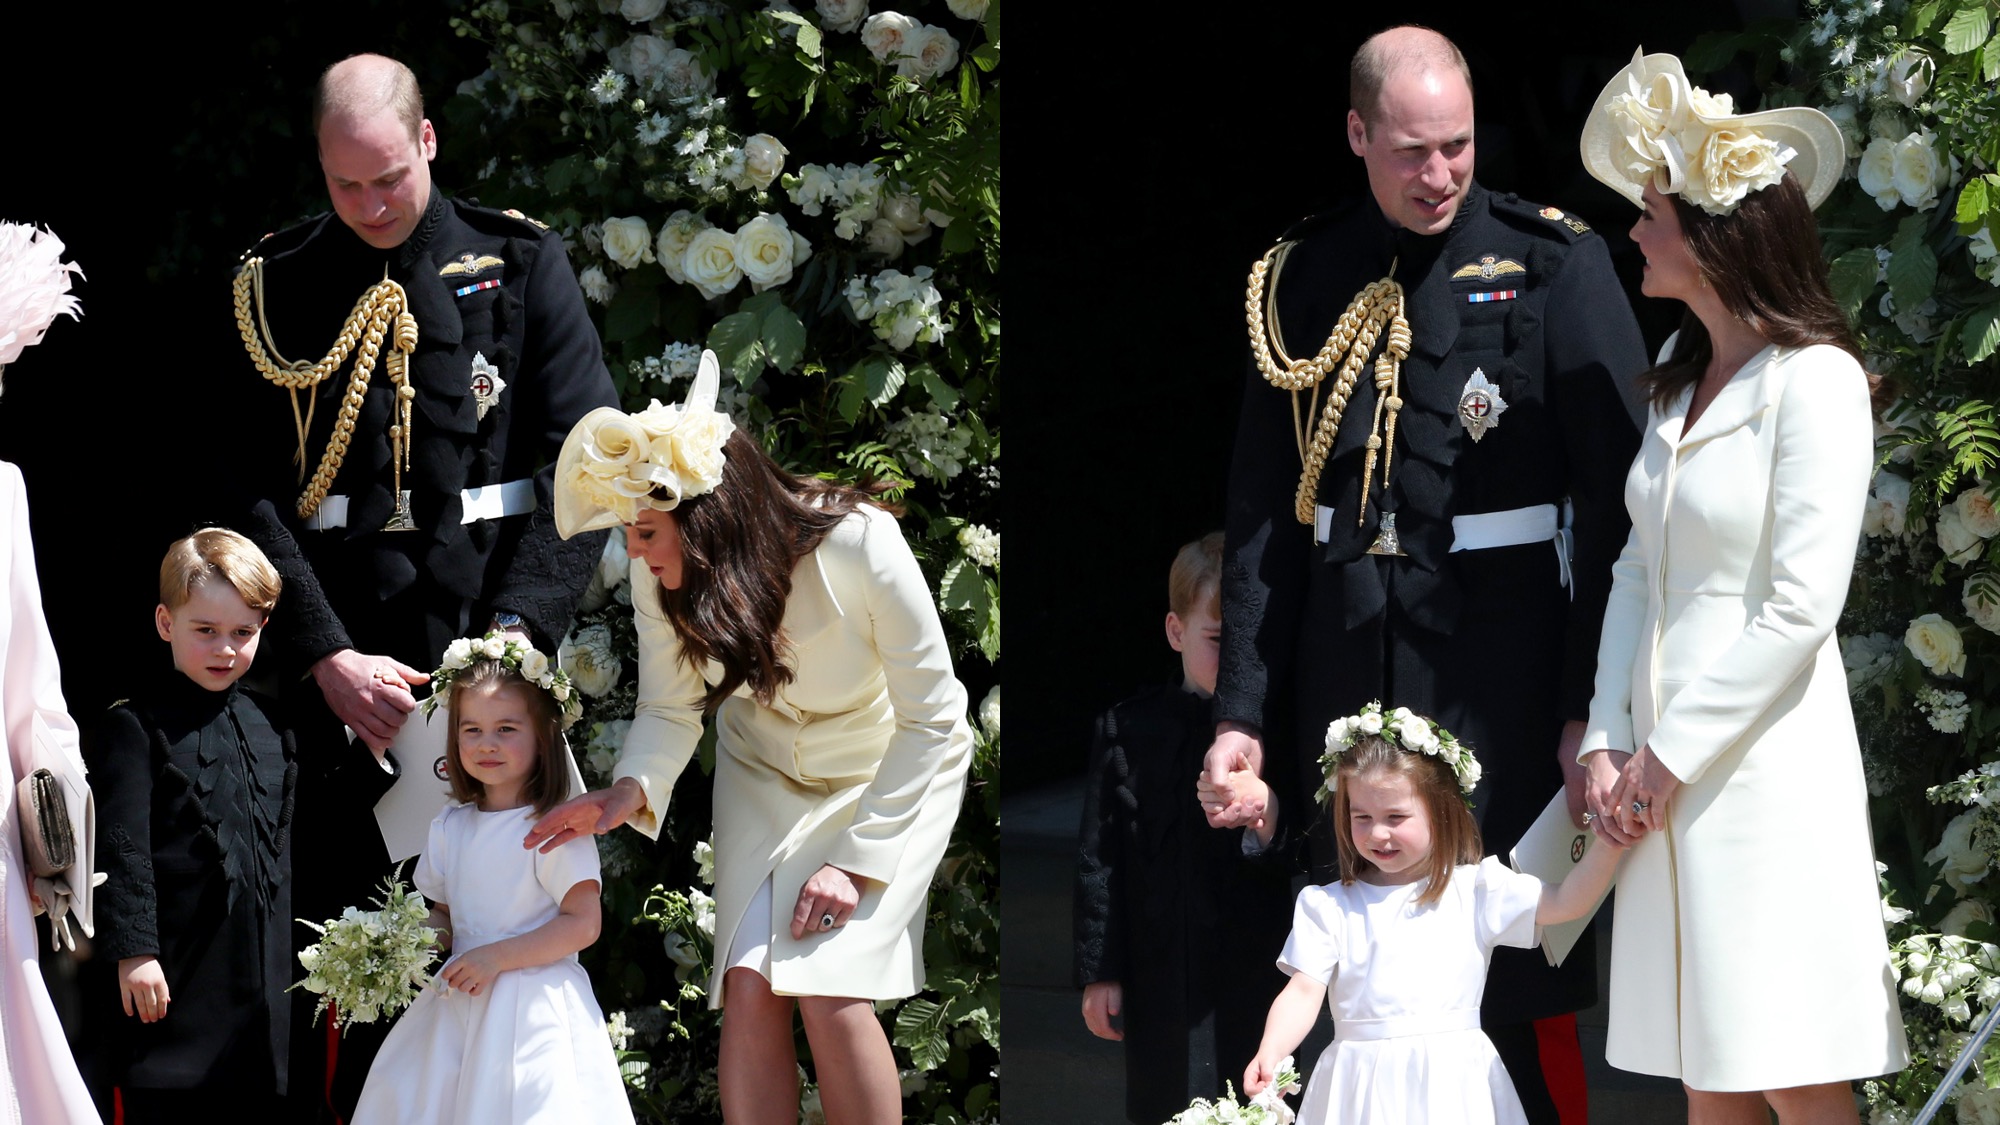 Prince William and Kate Middleton form a 'tight cluster' with Prince George and Princess Charlotte after the wedding of Prince Harry and Meghan Markle at St George's Chapel at Windsor Castle on May 19, 2018, in Windsor, England. 